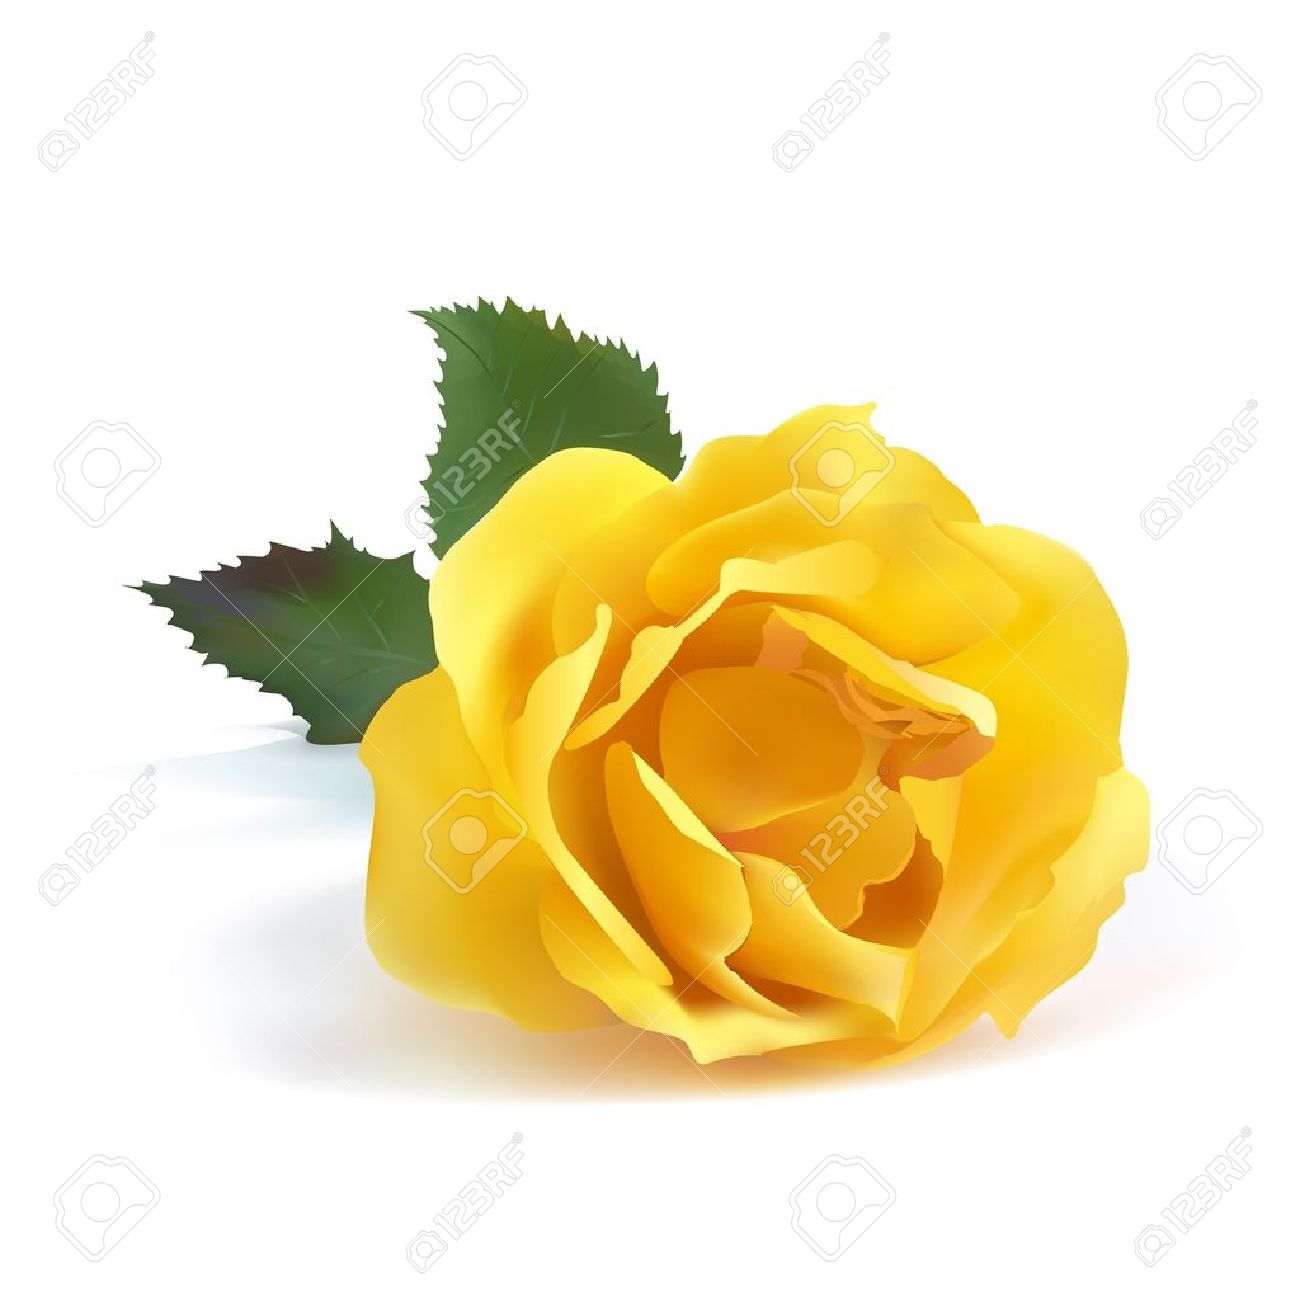 yellow roses pictures clip art - photo #41